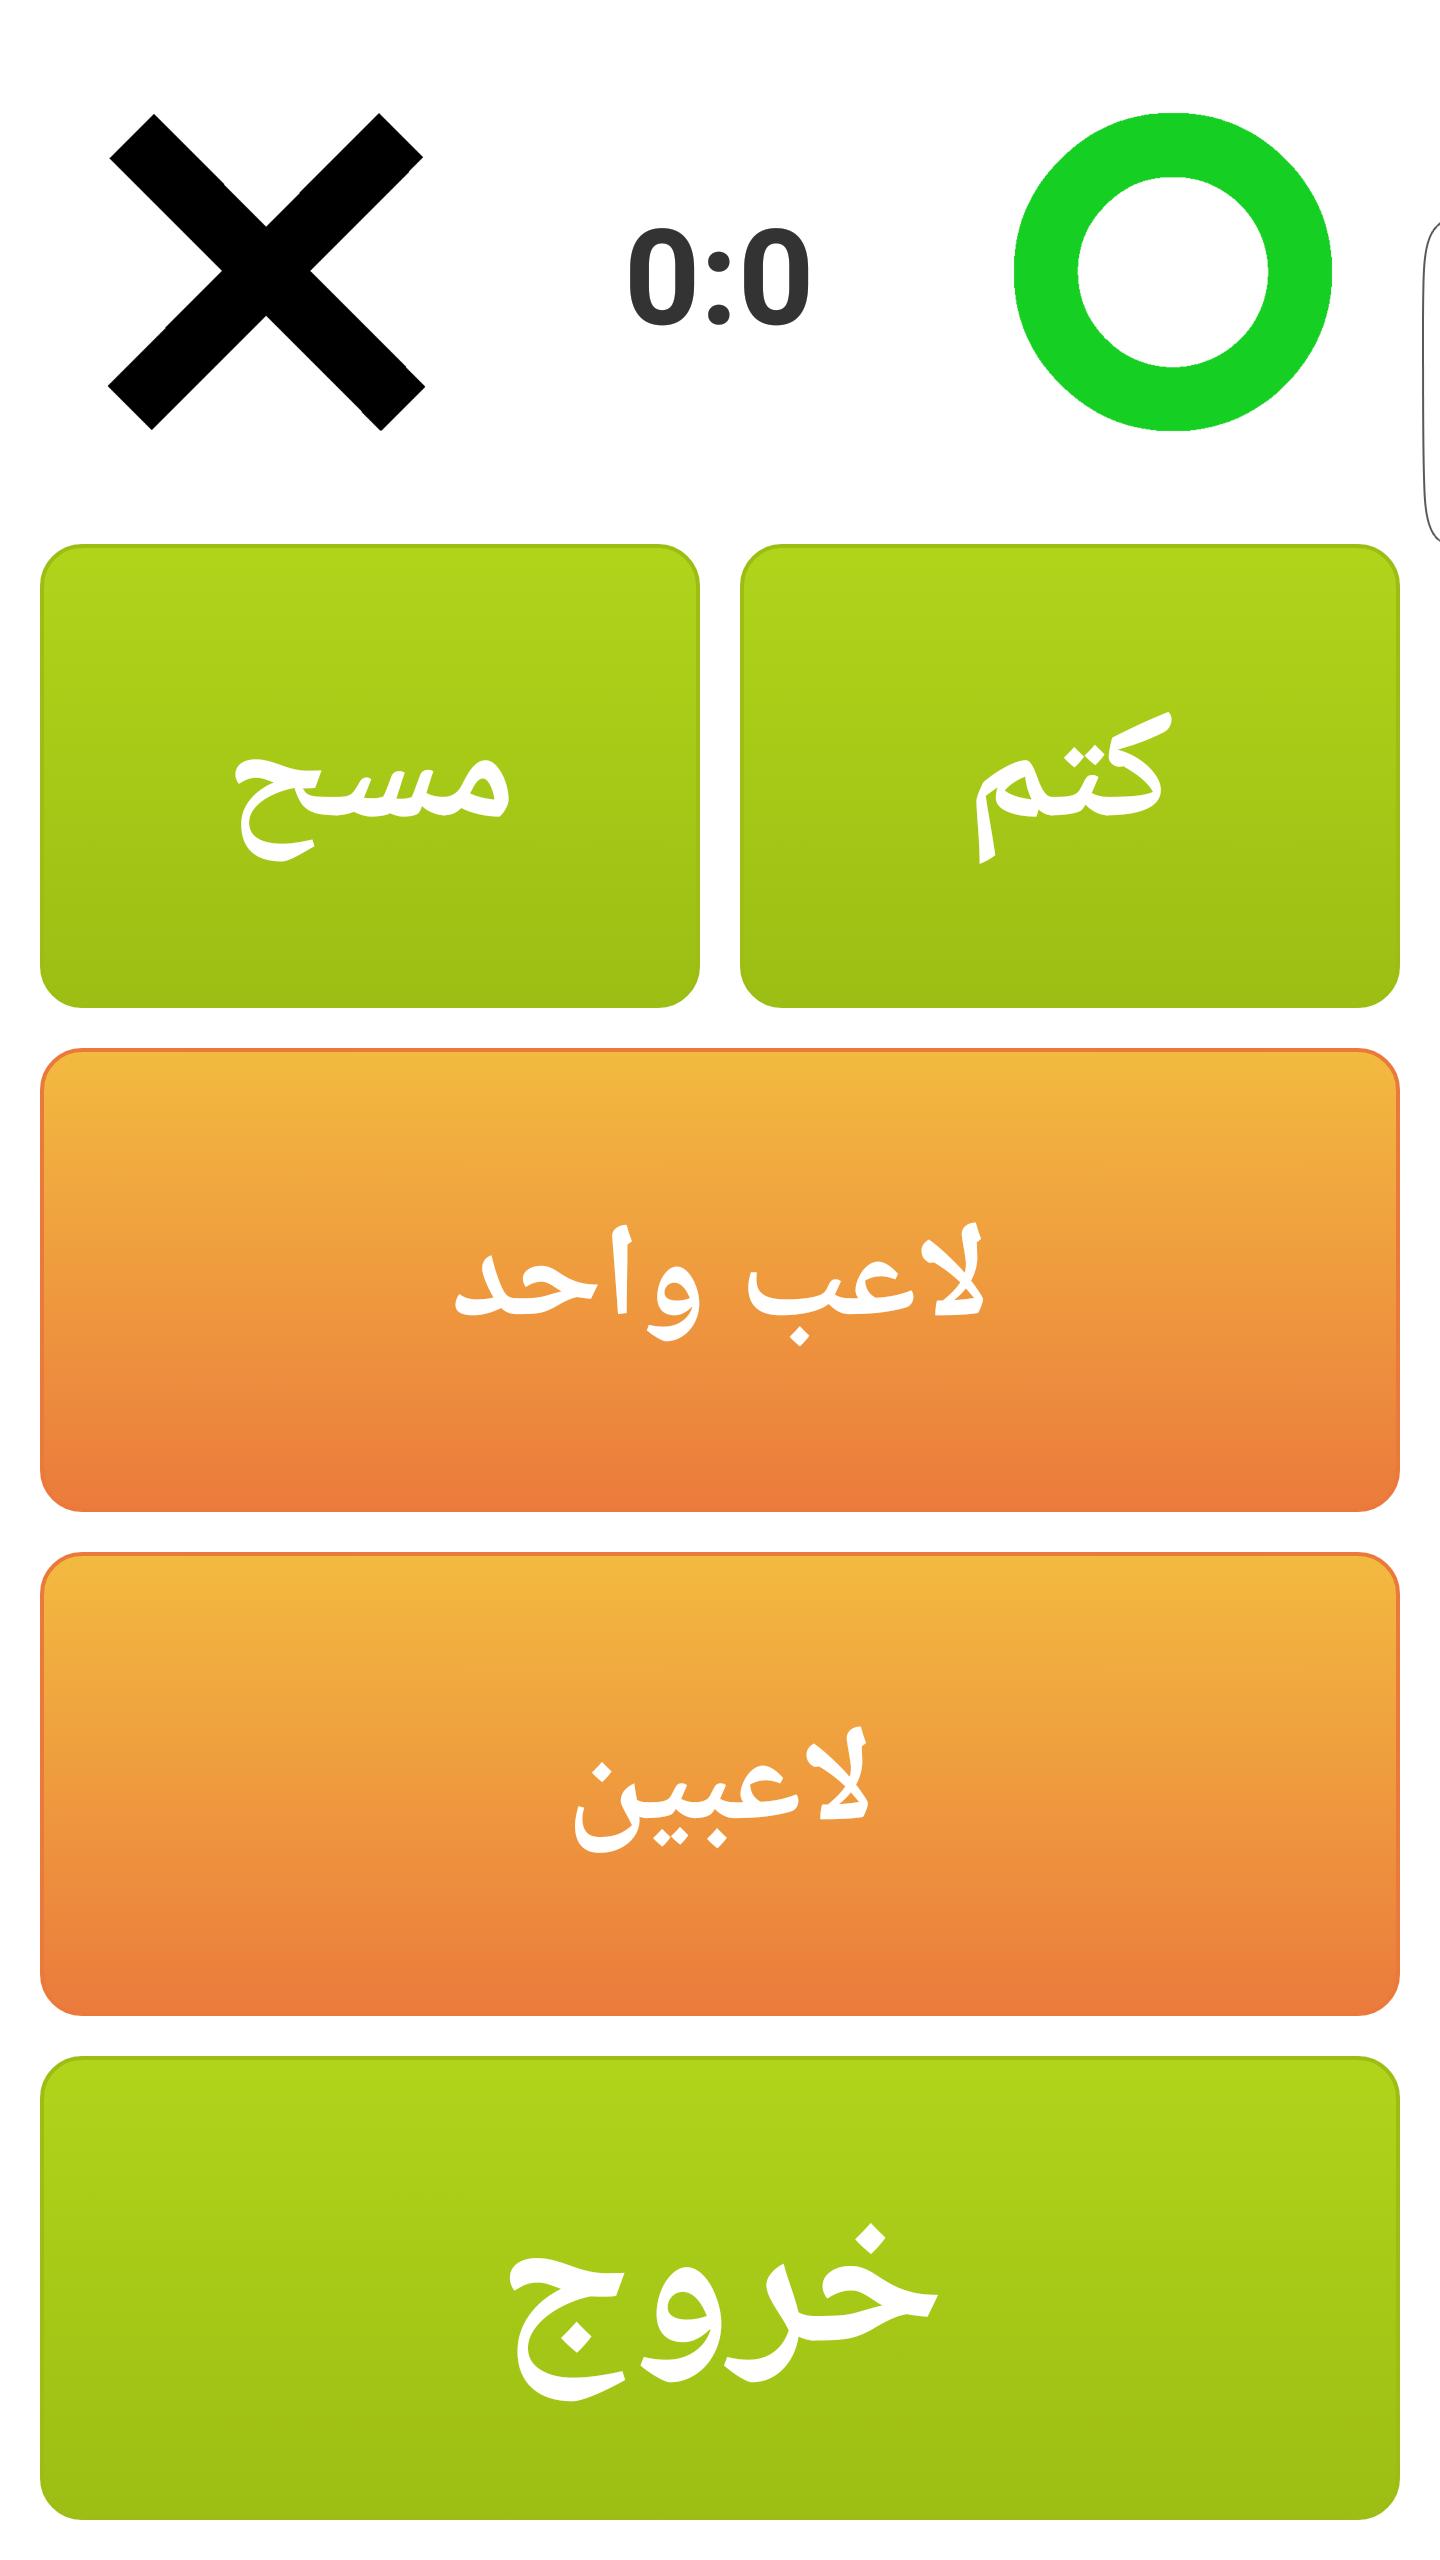 XO لعبة اكس او for Android - APK Download